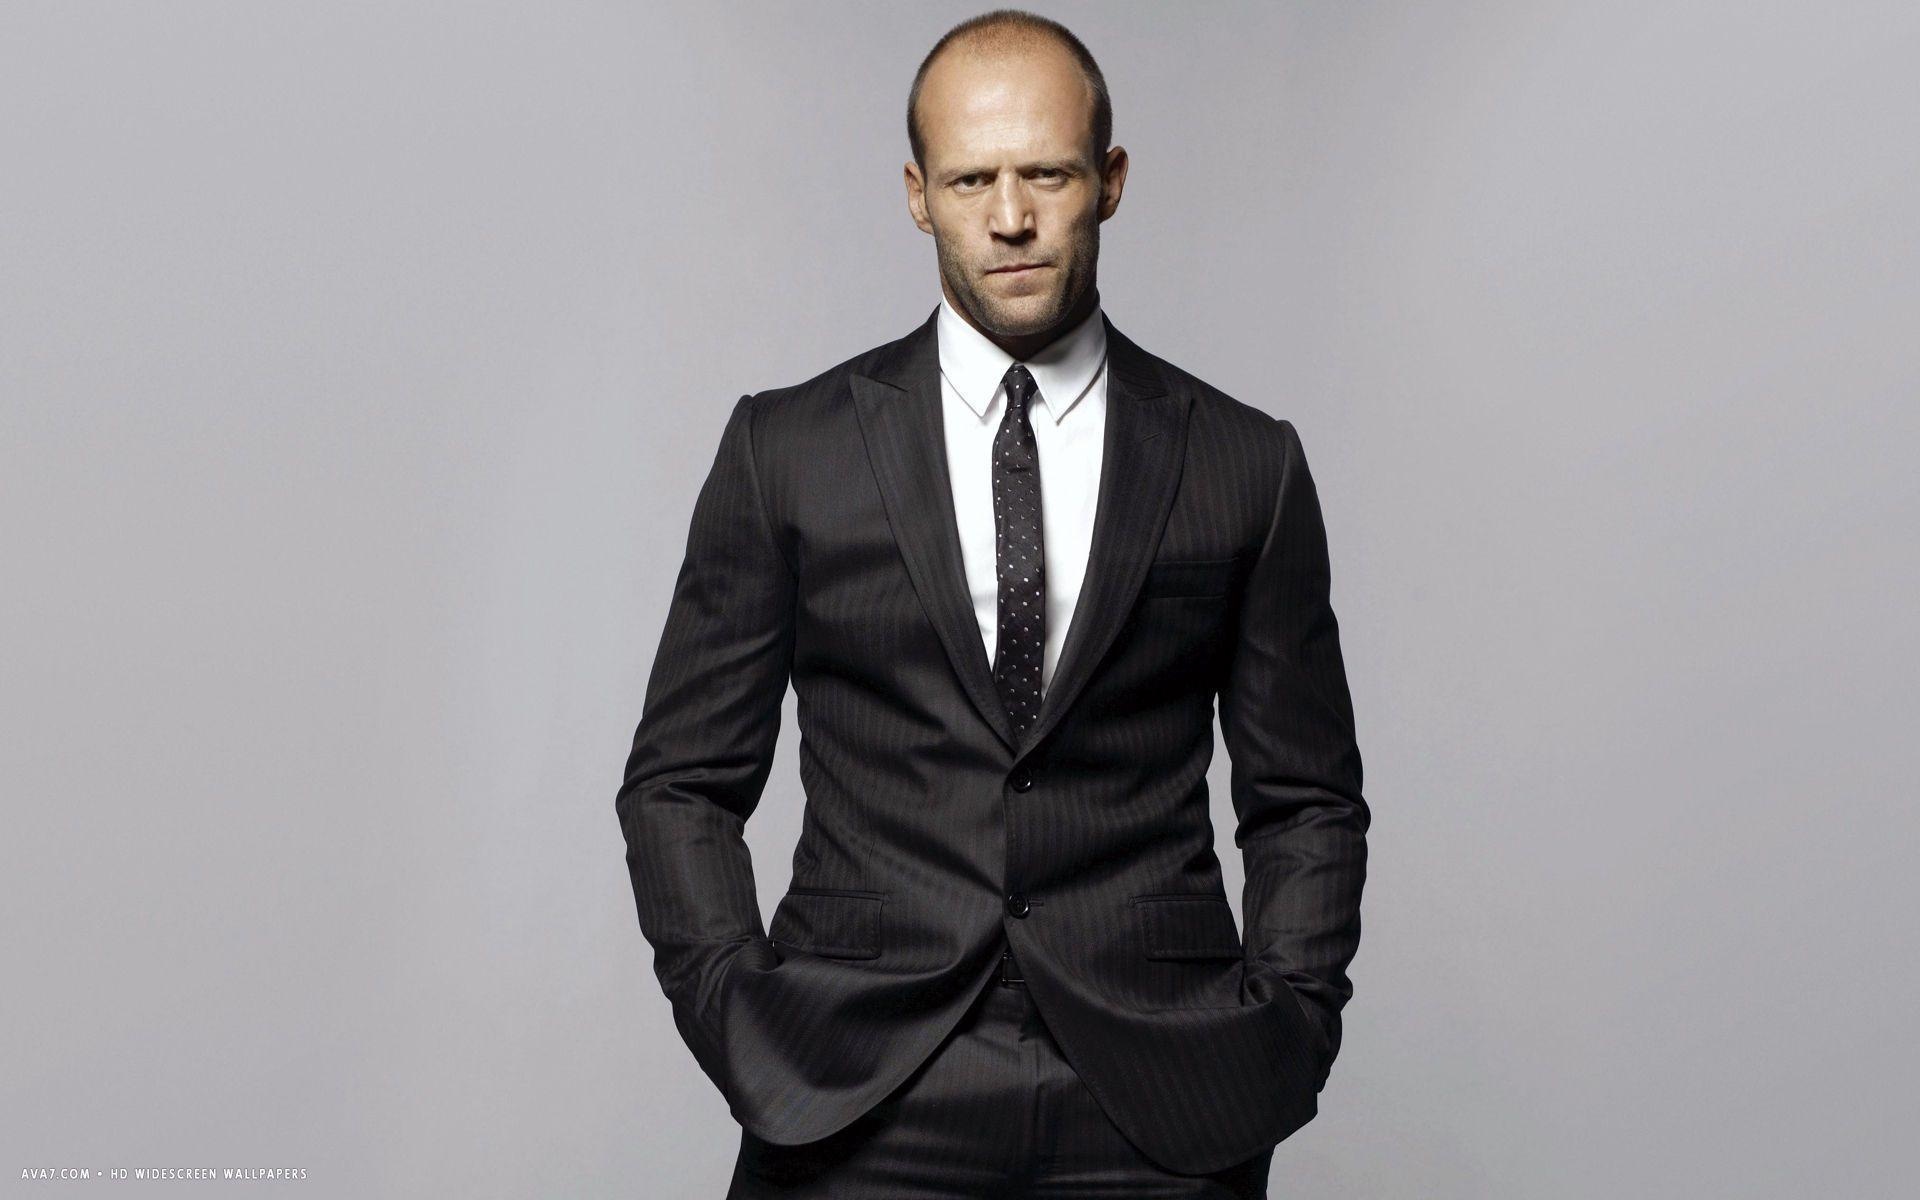 Jason Statham wallpapers, Mass appeal, Action-packed films, Martial arts expertise, 1920x1200 HD Desktop